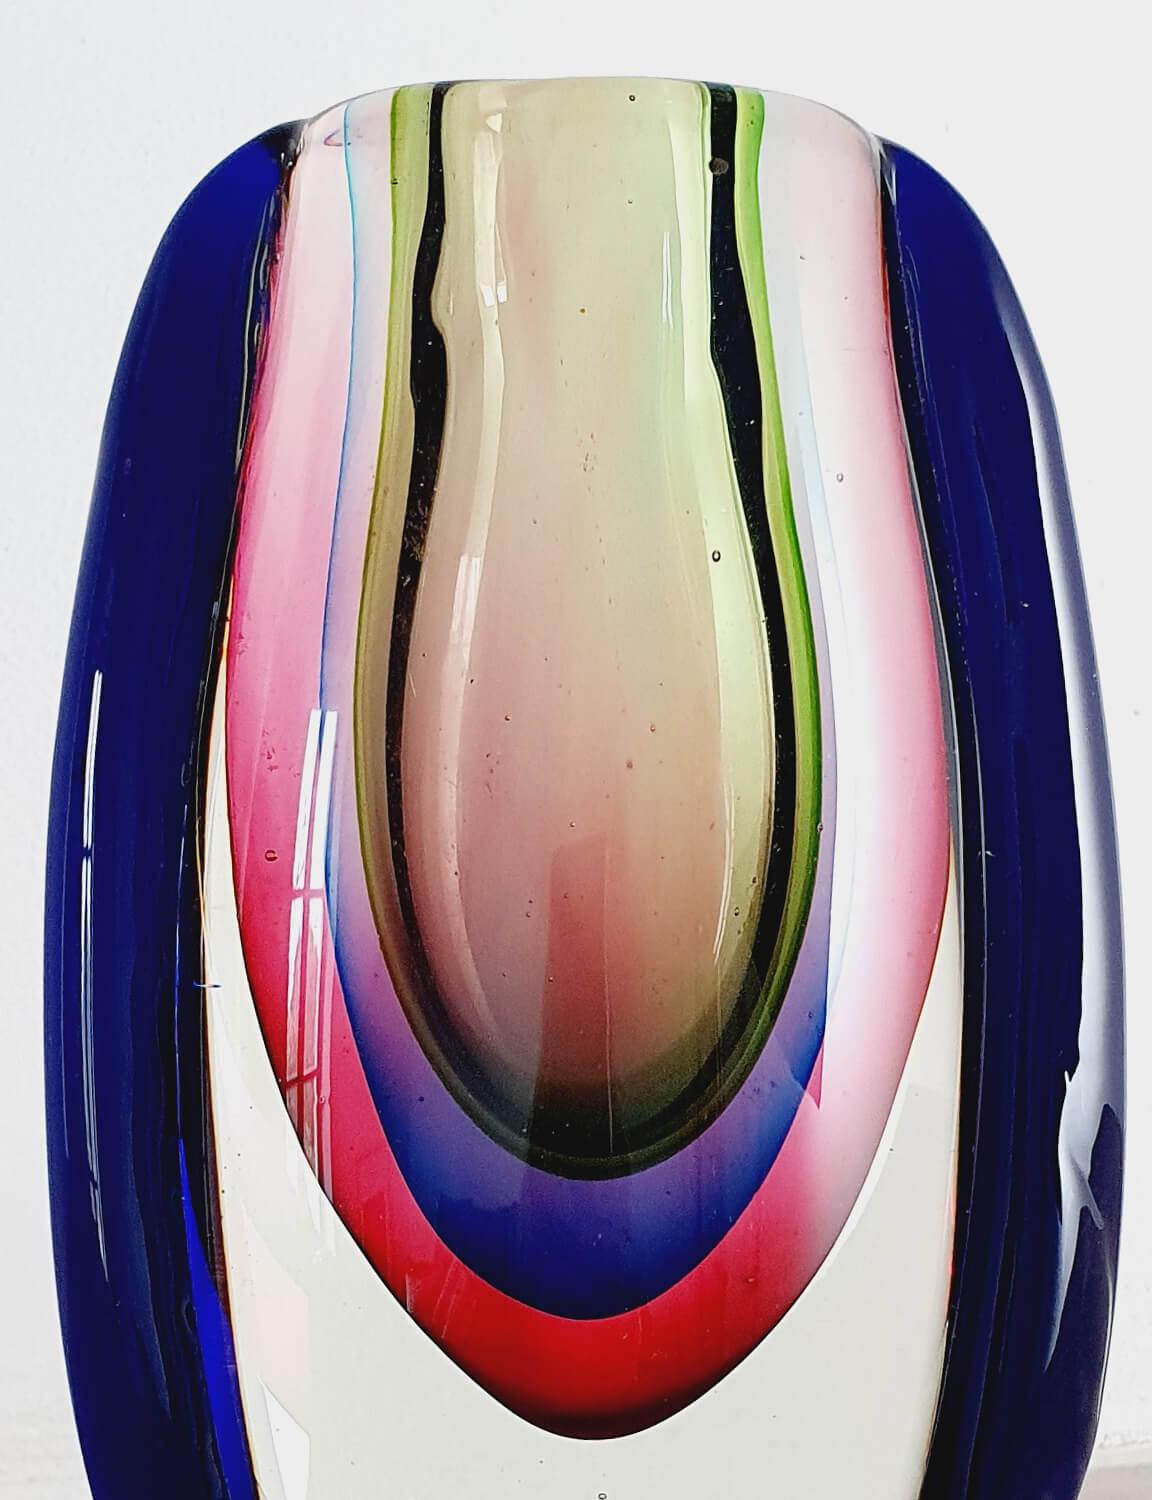 Salviati is one of the World's most renowned glass blowing furnaces in Venice. It was founded in 1859 and has since then produced some of the most desirable pieces of Murano glass. This piece is a rare quadruple sommerso (submerged) glass Vase. A